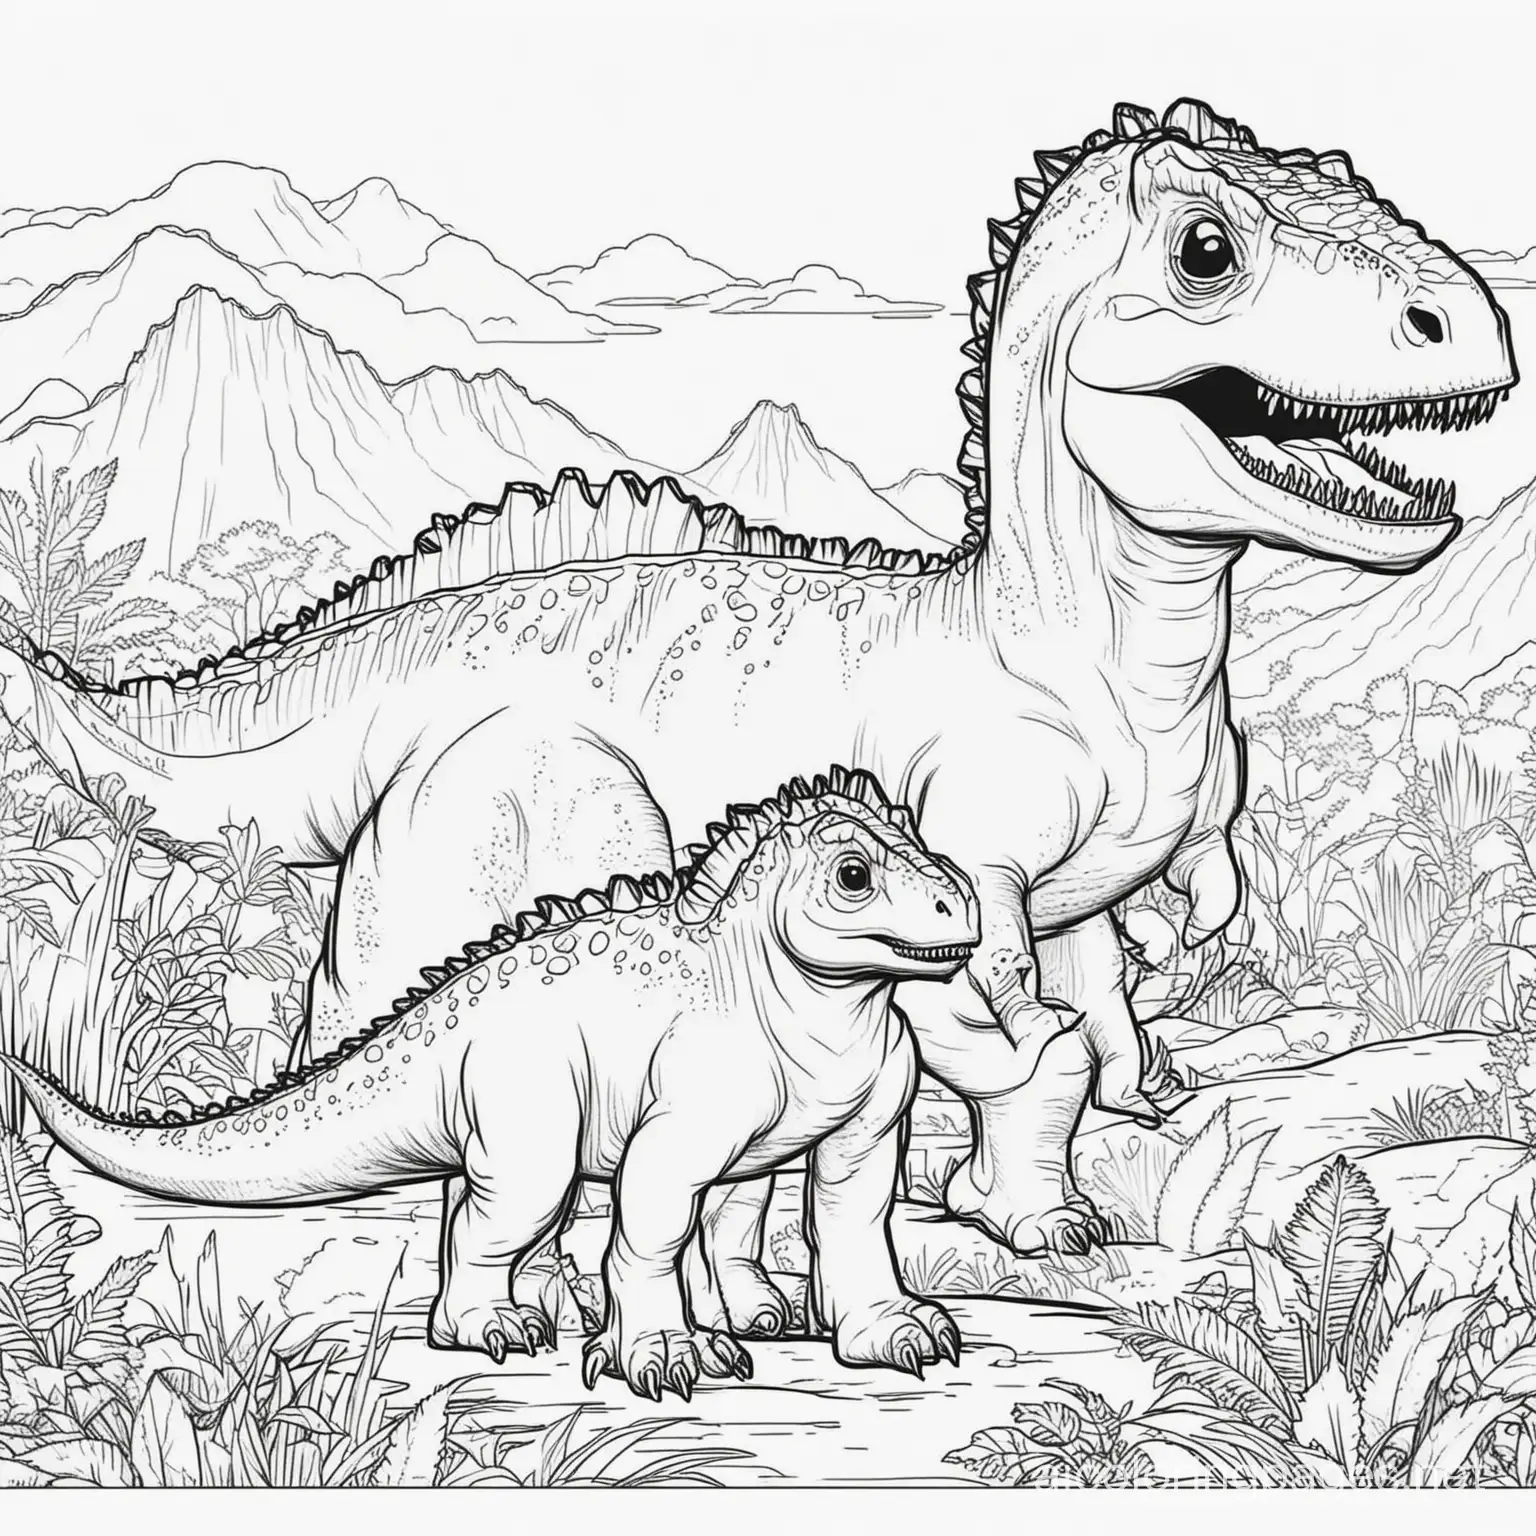 Dinosaurs, Coloring Page, black and white, line art, white background, Simplicity, Ample White Space. The background of the coloring page is plain white to make it easy for young children to color within the lines. The outlines of all the subjects are easy to distinguish, making it simple for kids to color without too much difficulty